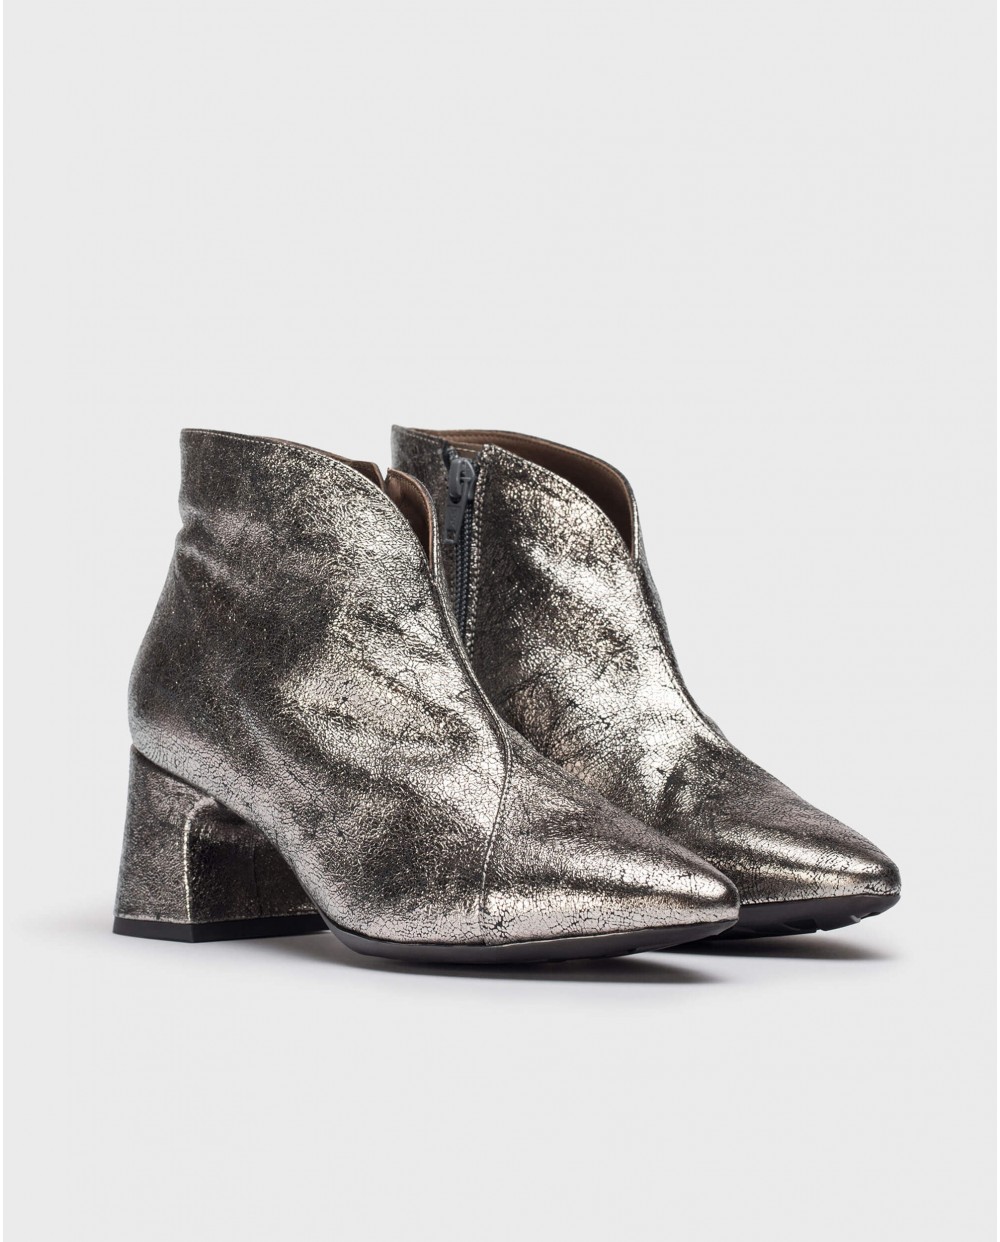 Wonders-Ankle Boots-Dark grey ELIOT ankle boot